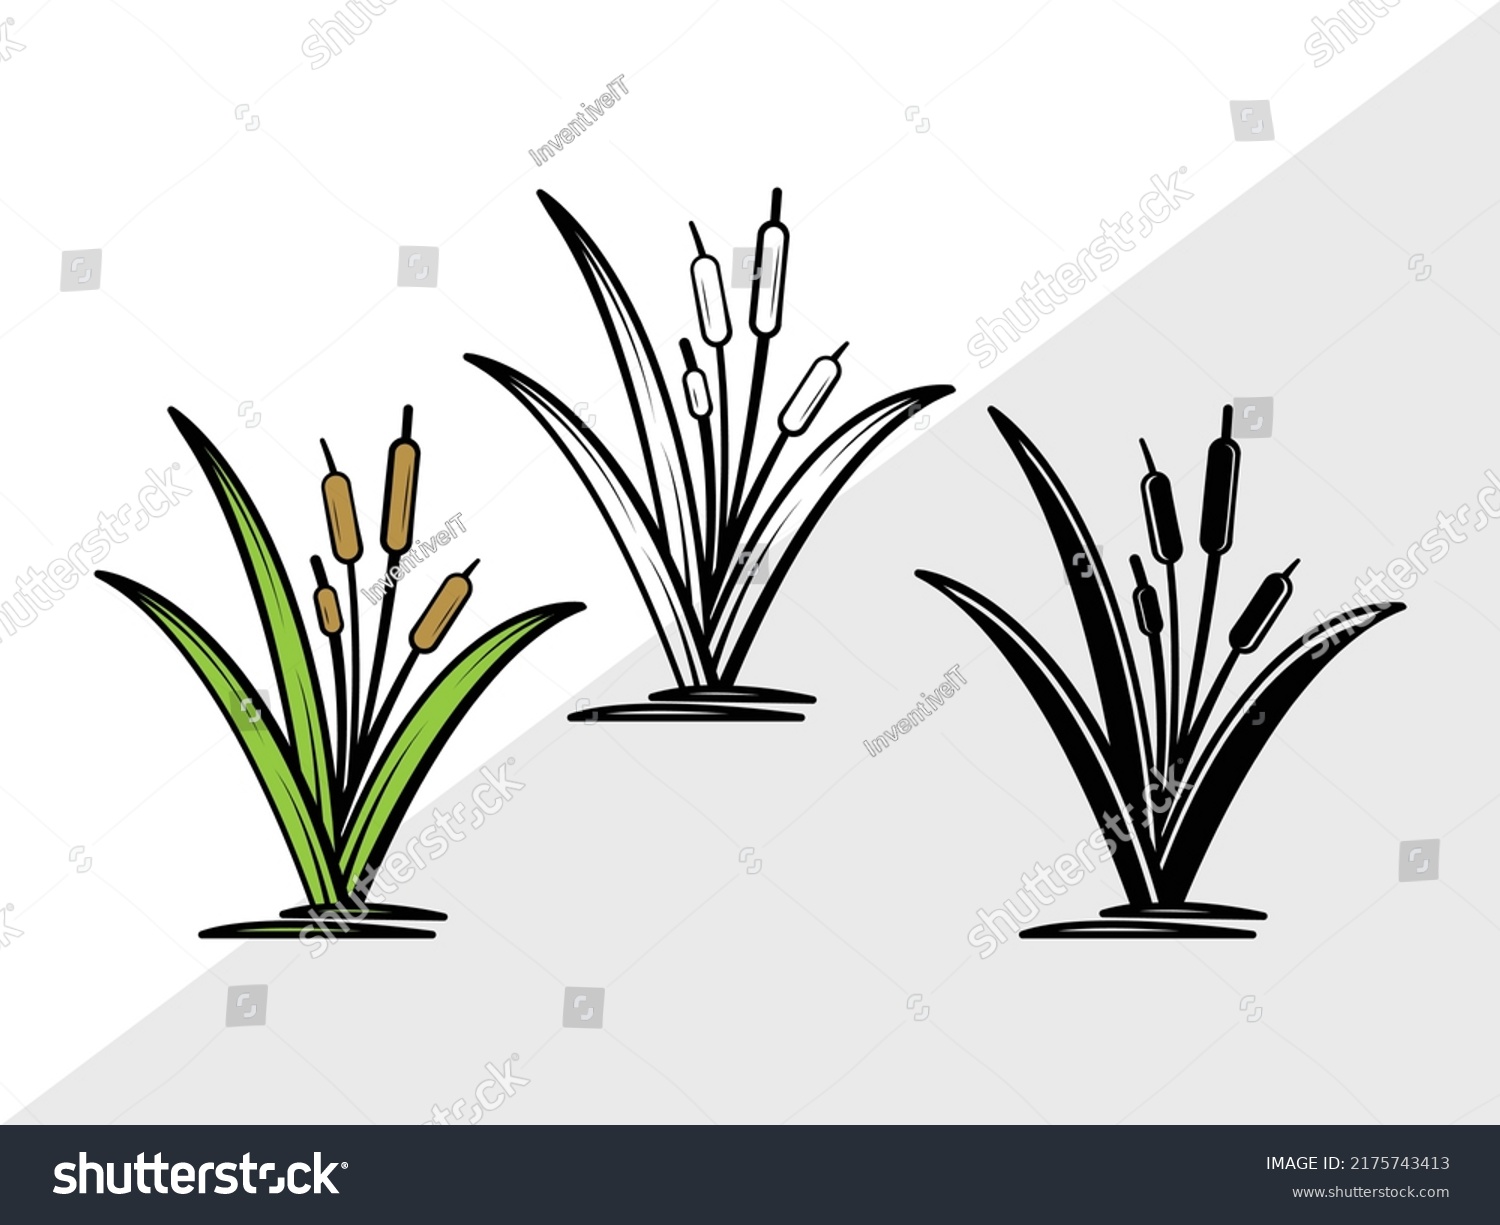 Cattail Svg Printable Vector Illustration Royalty Free Stock Vector 2175743413